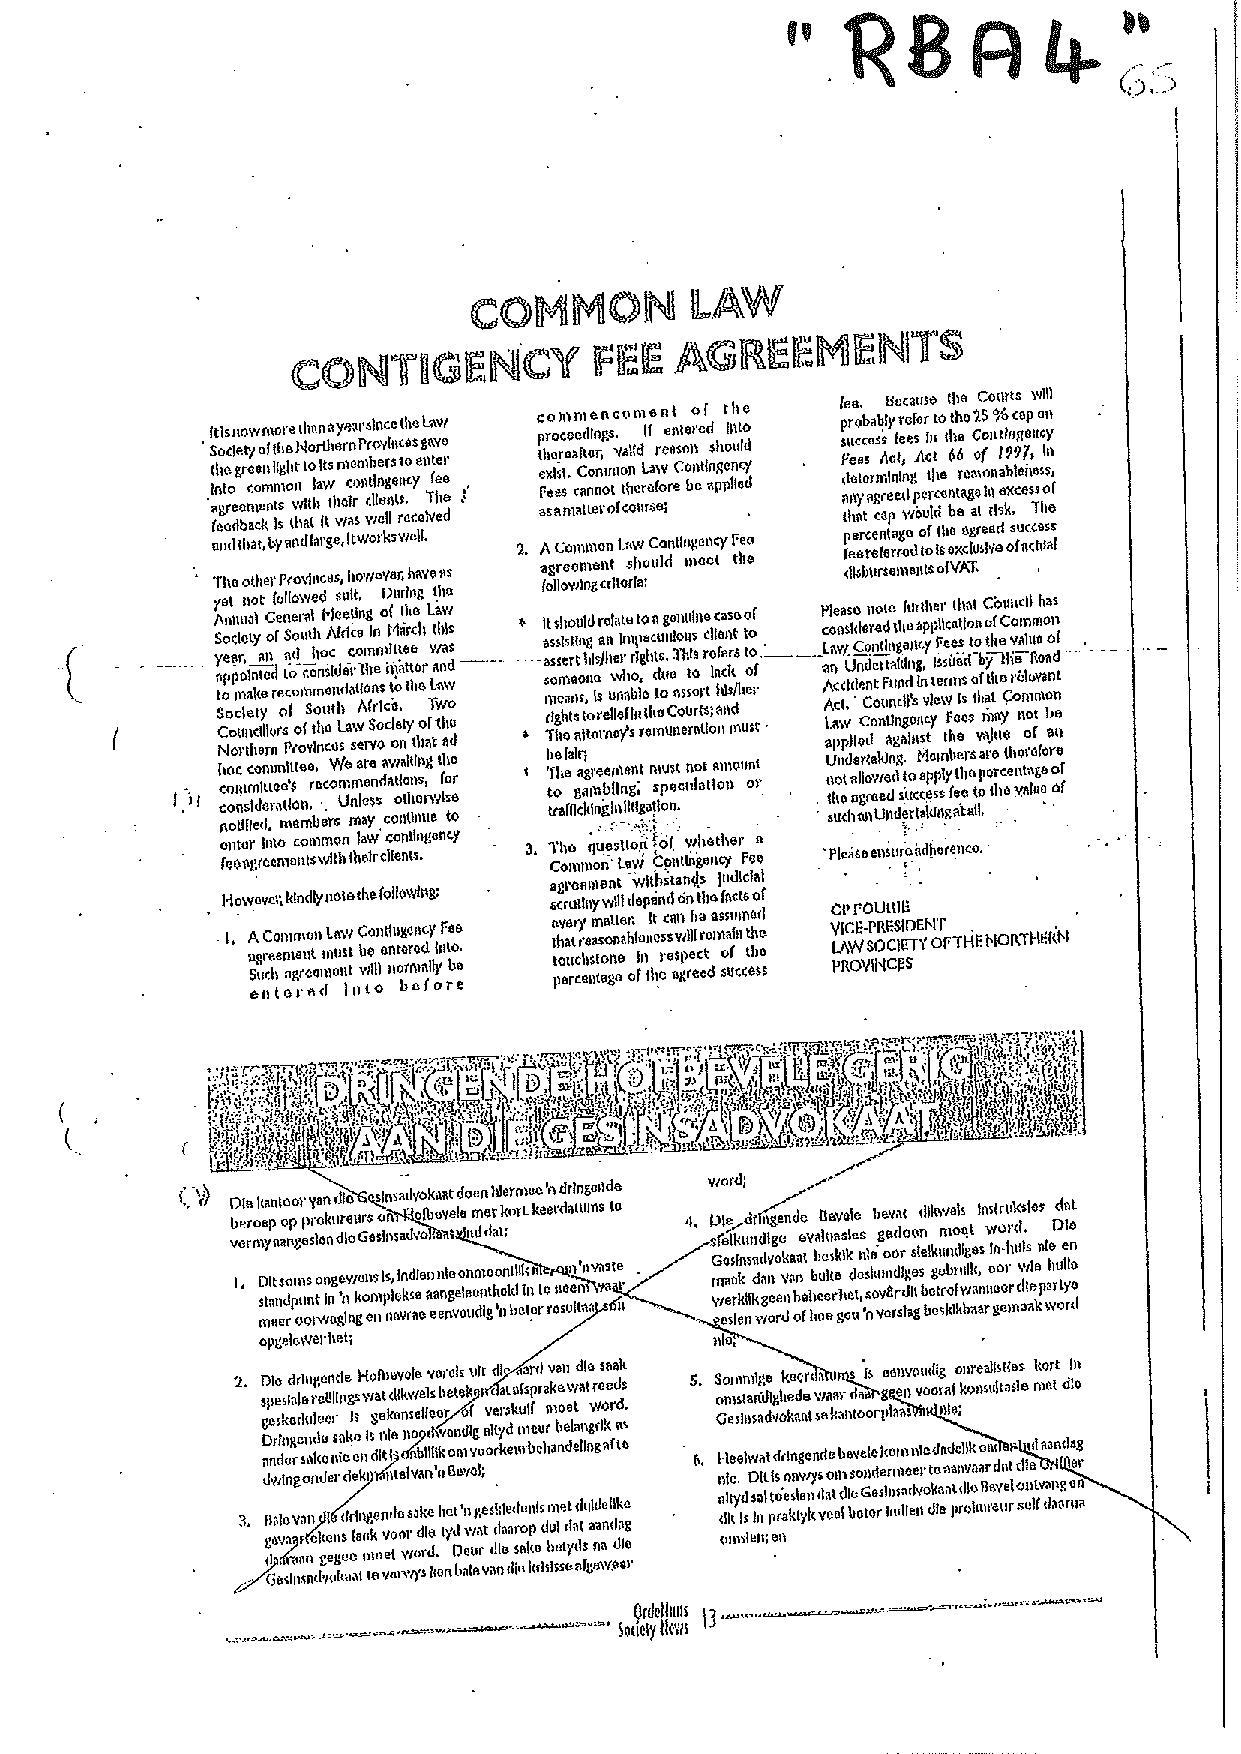 Annexure RBA4 Common Law Contingency Fee Agreements Further confirmation of ruling by LSNP page 001